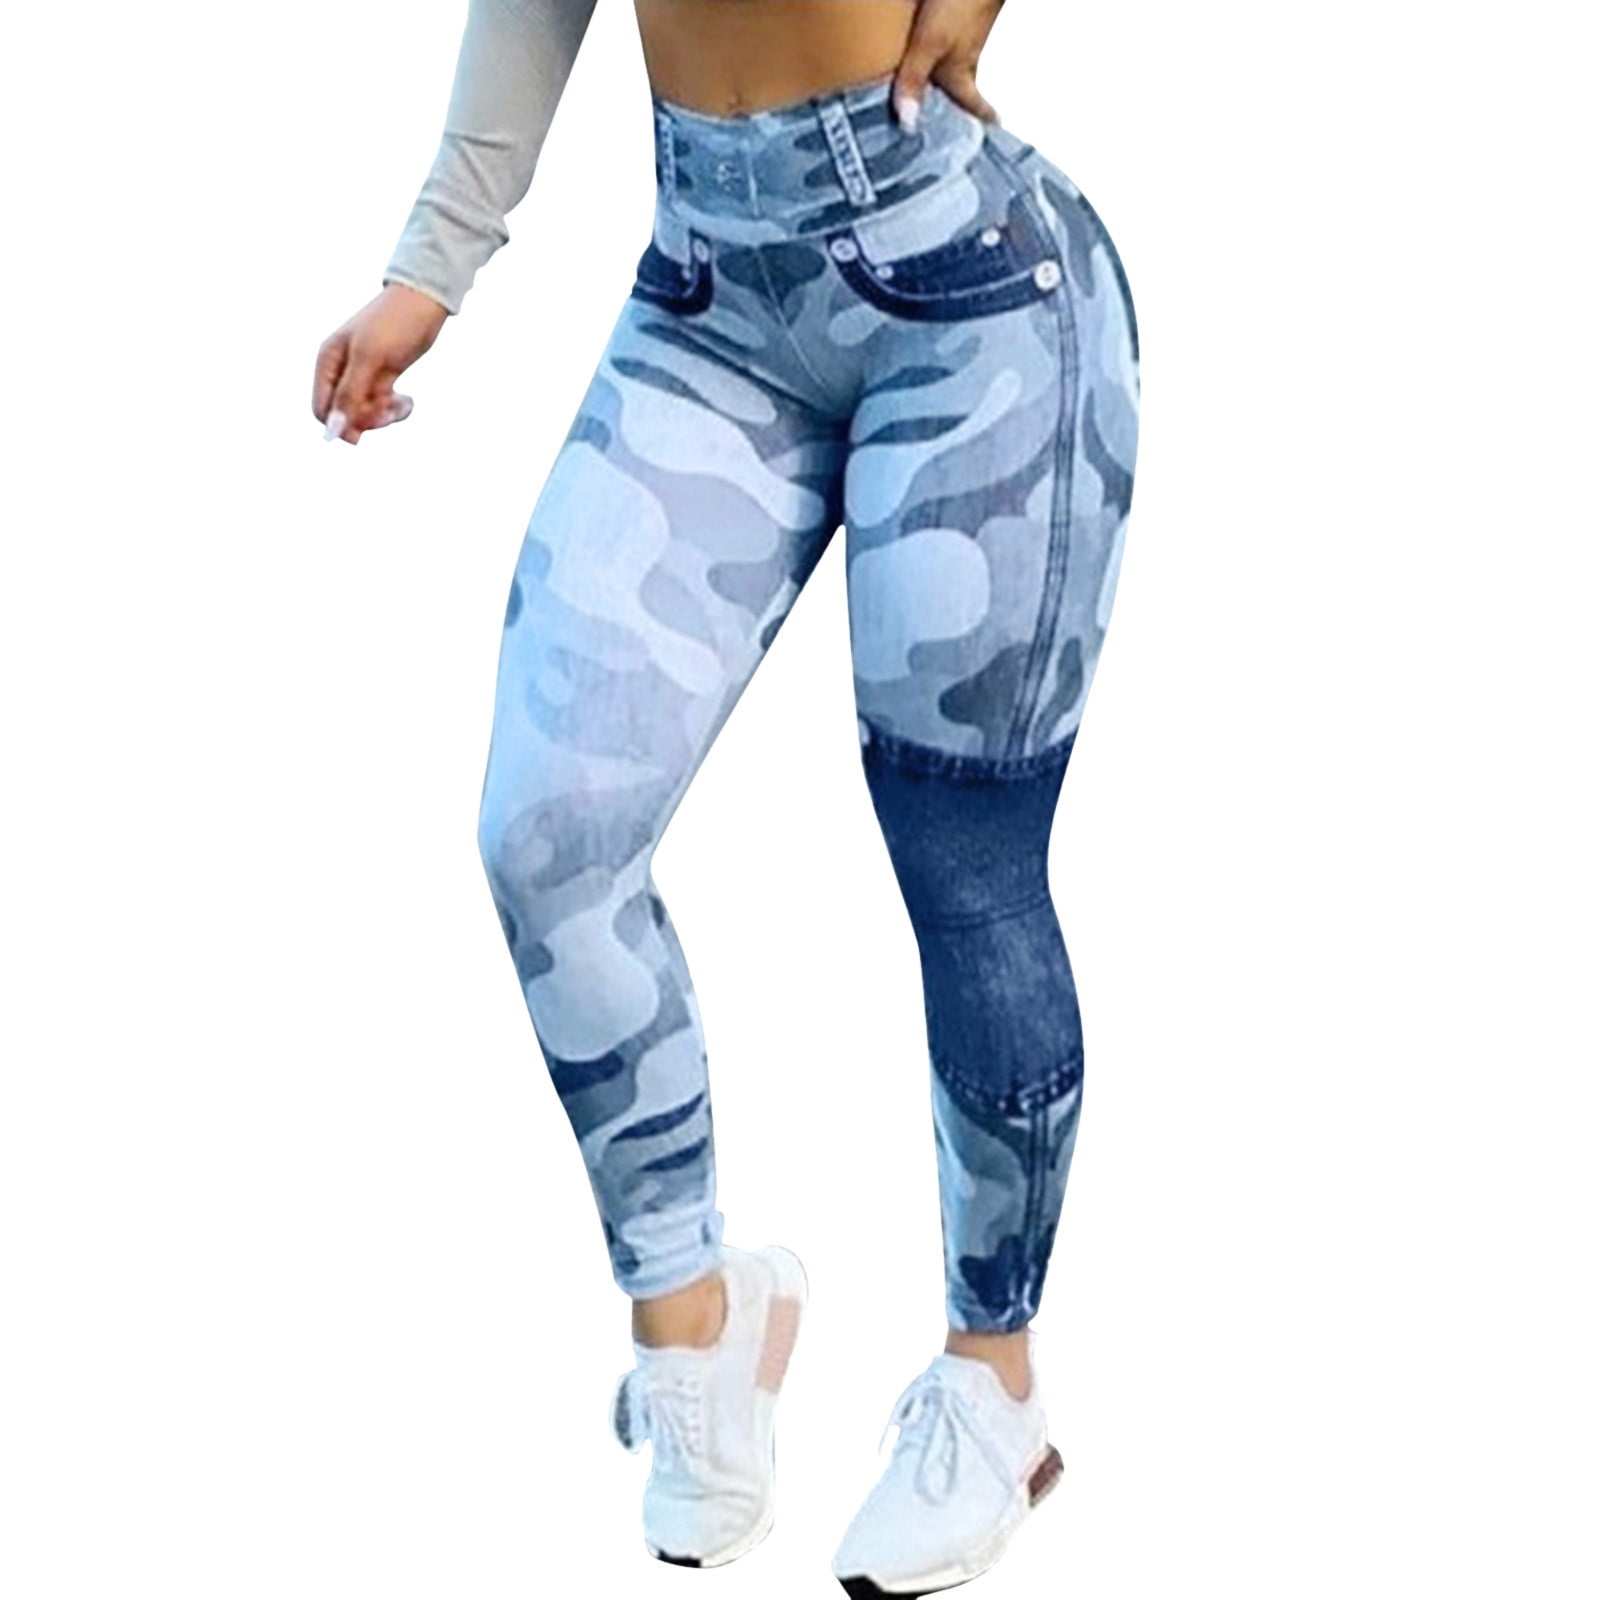 fvwitlyh 80s Clothes Women Casual High Waist Camouflage Slim Fit Button  Stitching Jeans Leggings Yoga Shorts Women